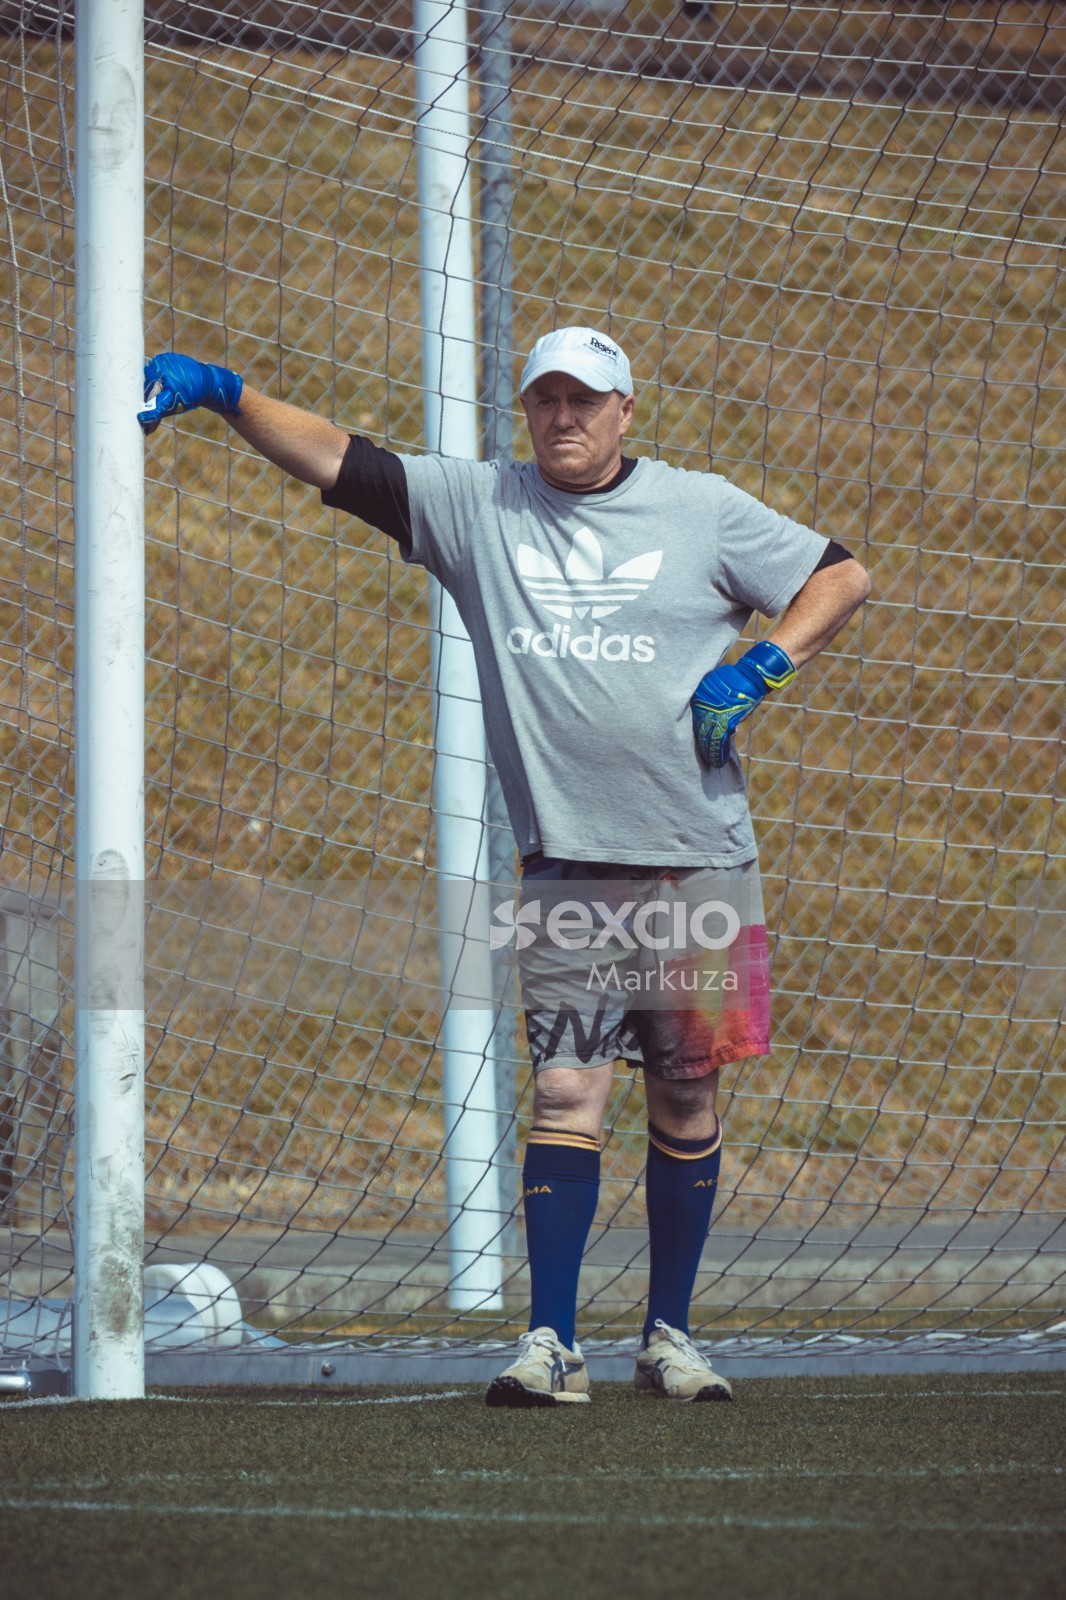 Goalkeeper resting with a goalpost - Sports Zone sunday league